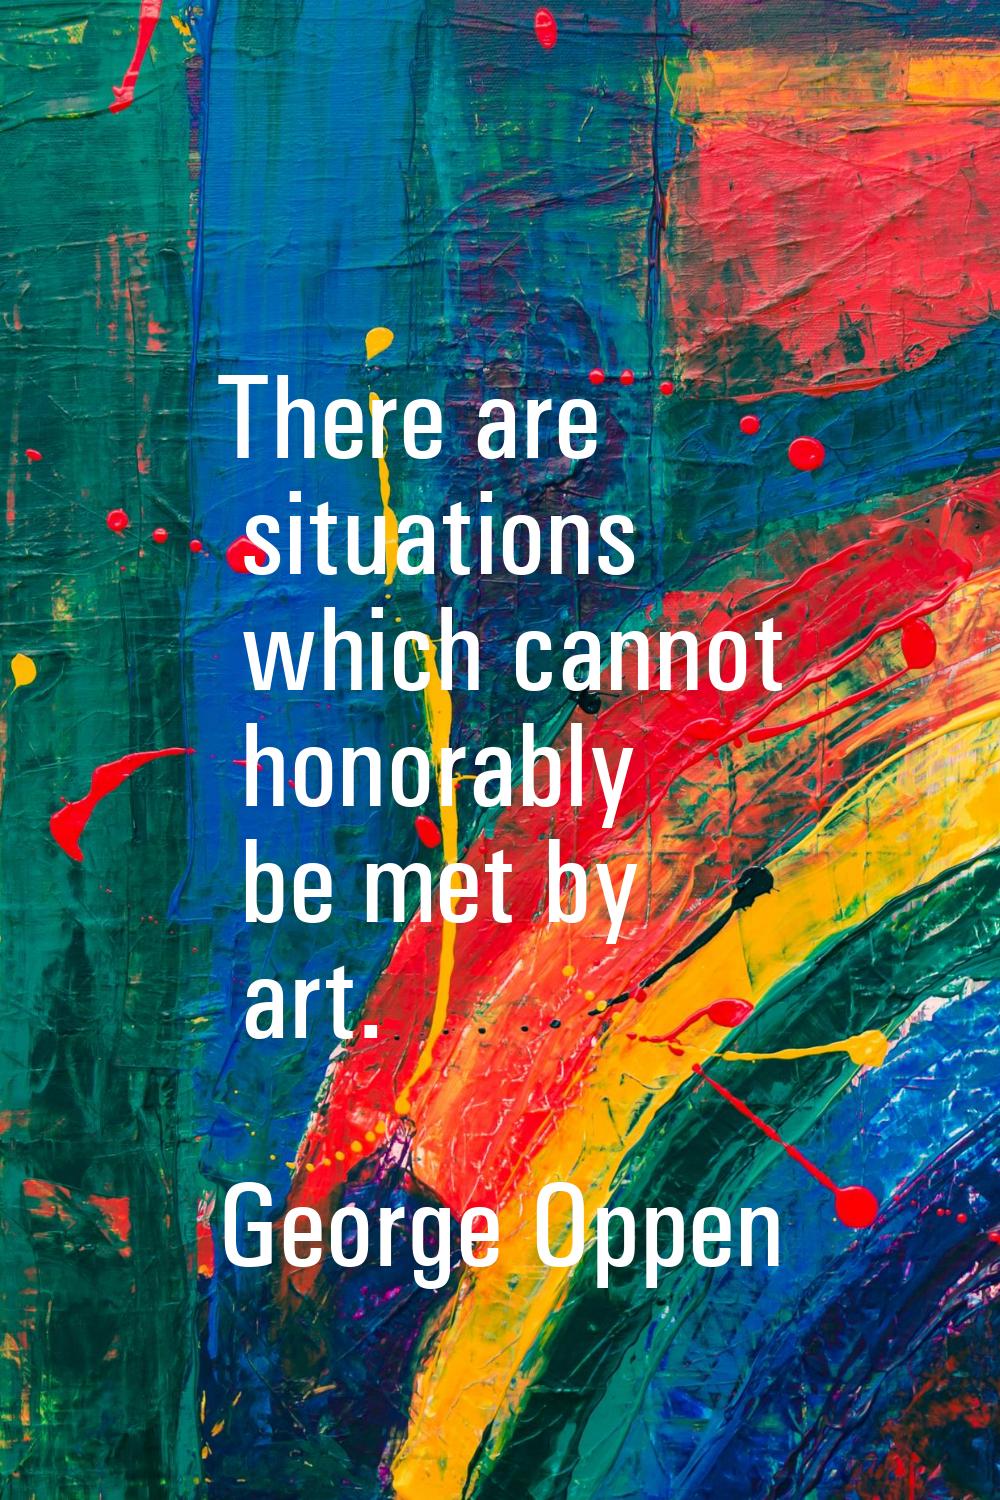 There are situations which cannot honorably be met by art.